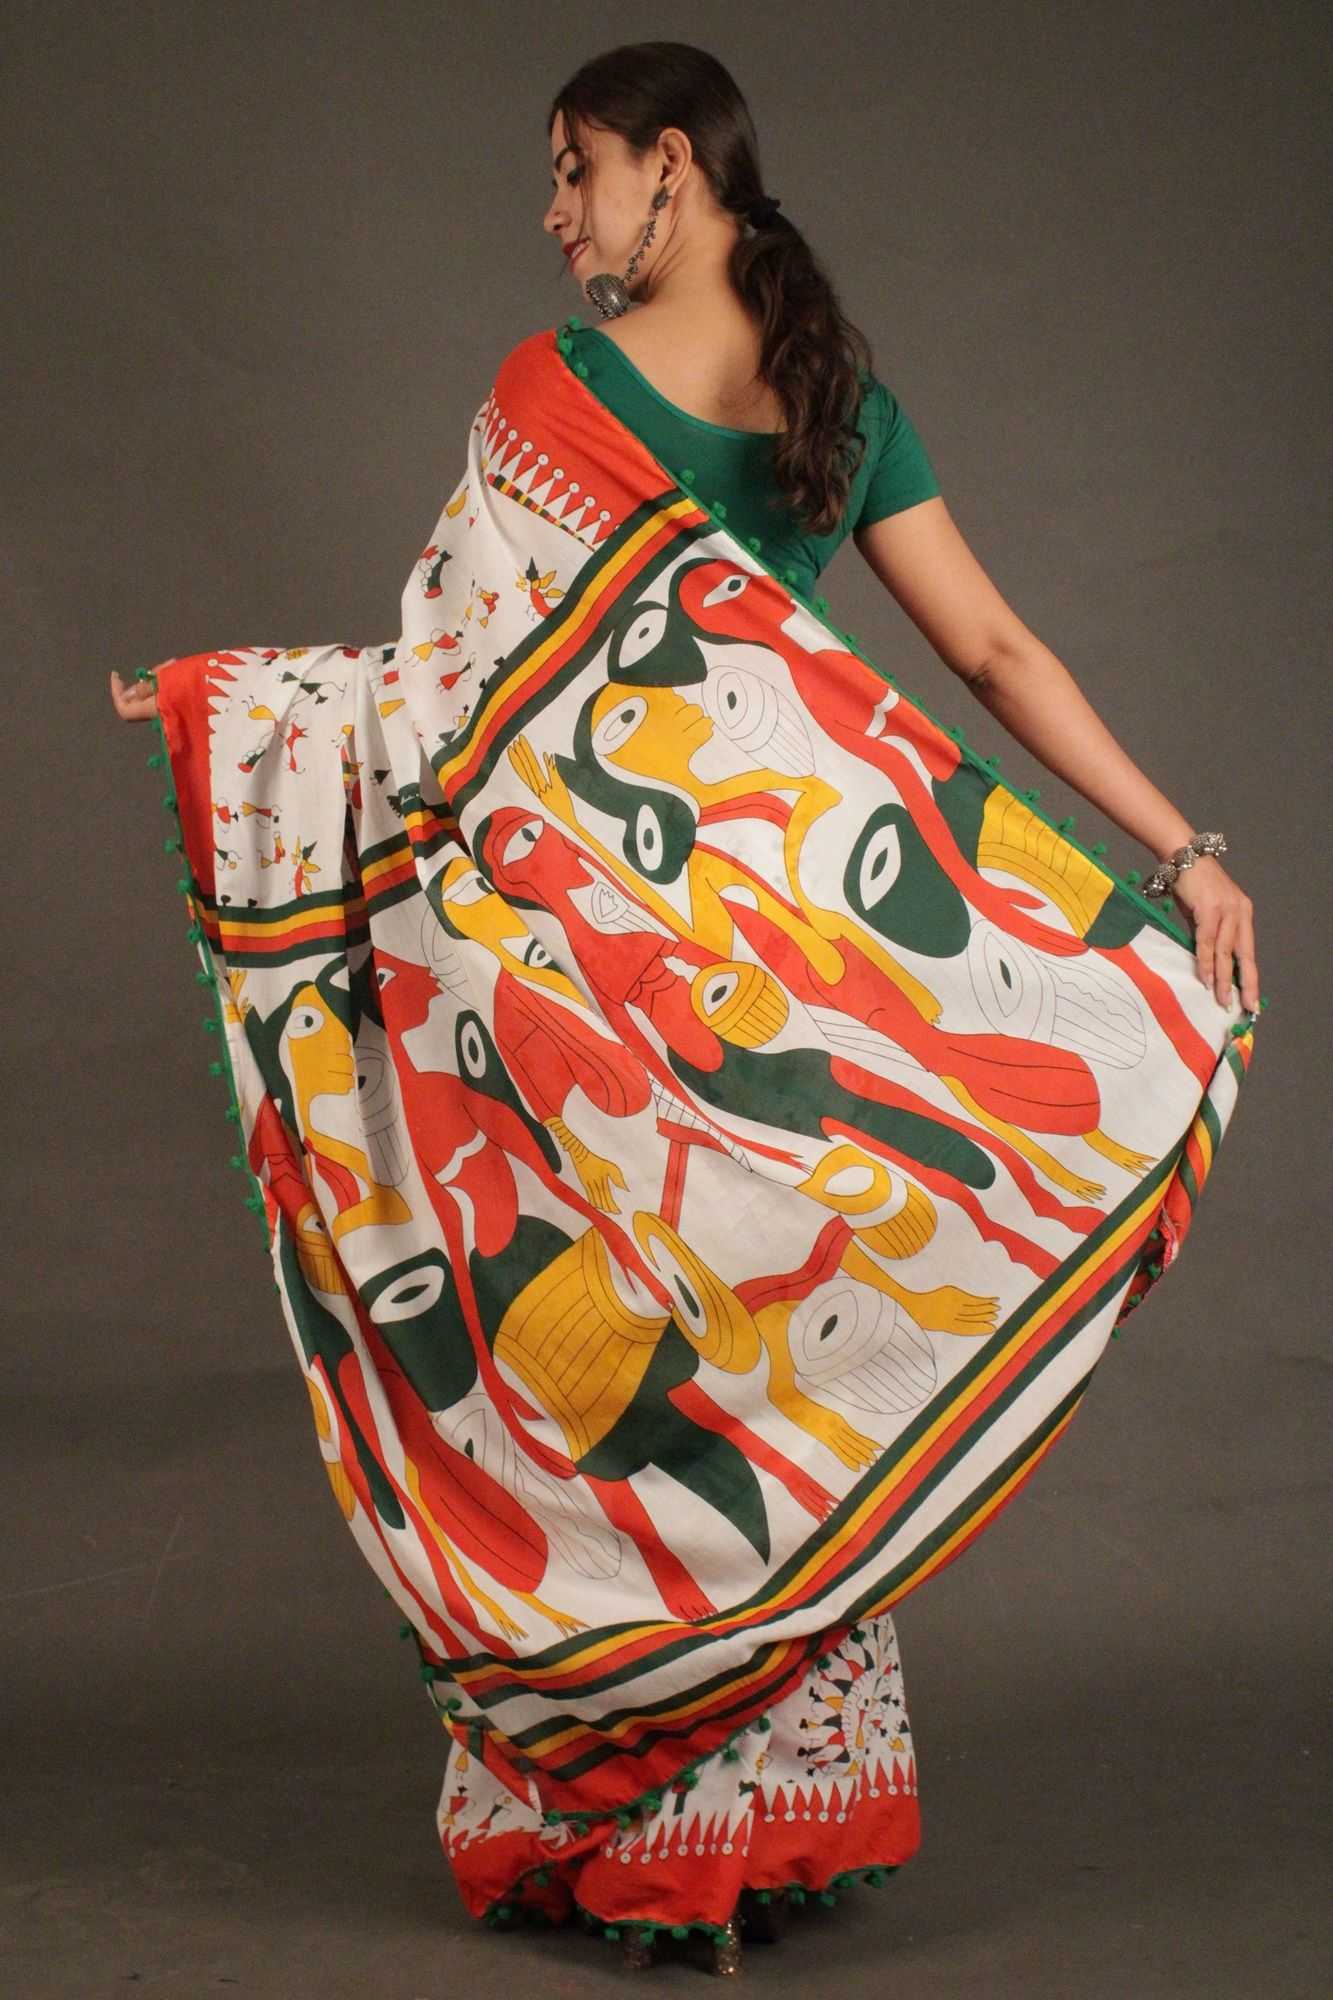 Saffron-White floral vegetable printed mul mul Cotton Wrap in 1 minute saree - Isadora Life Online Shopping Store